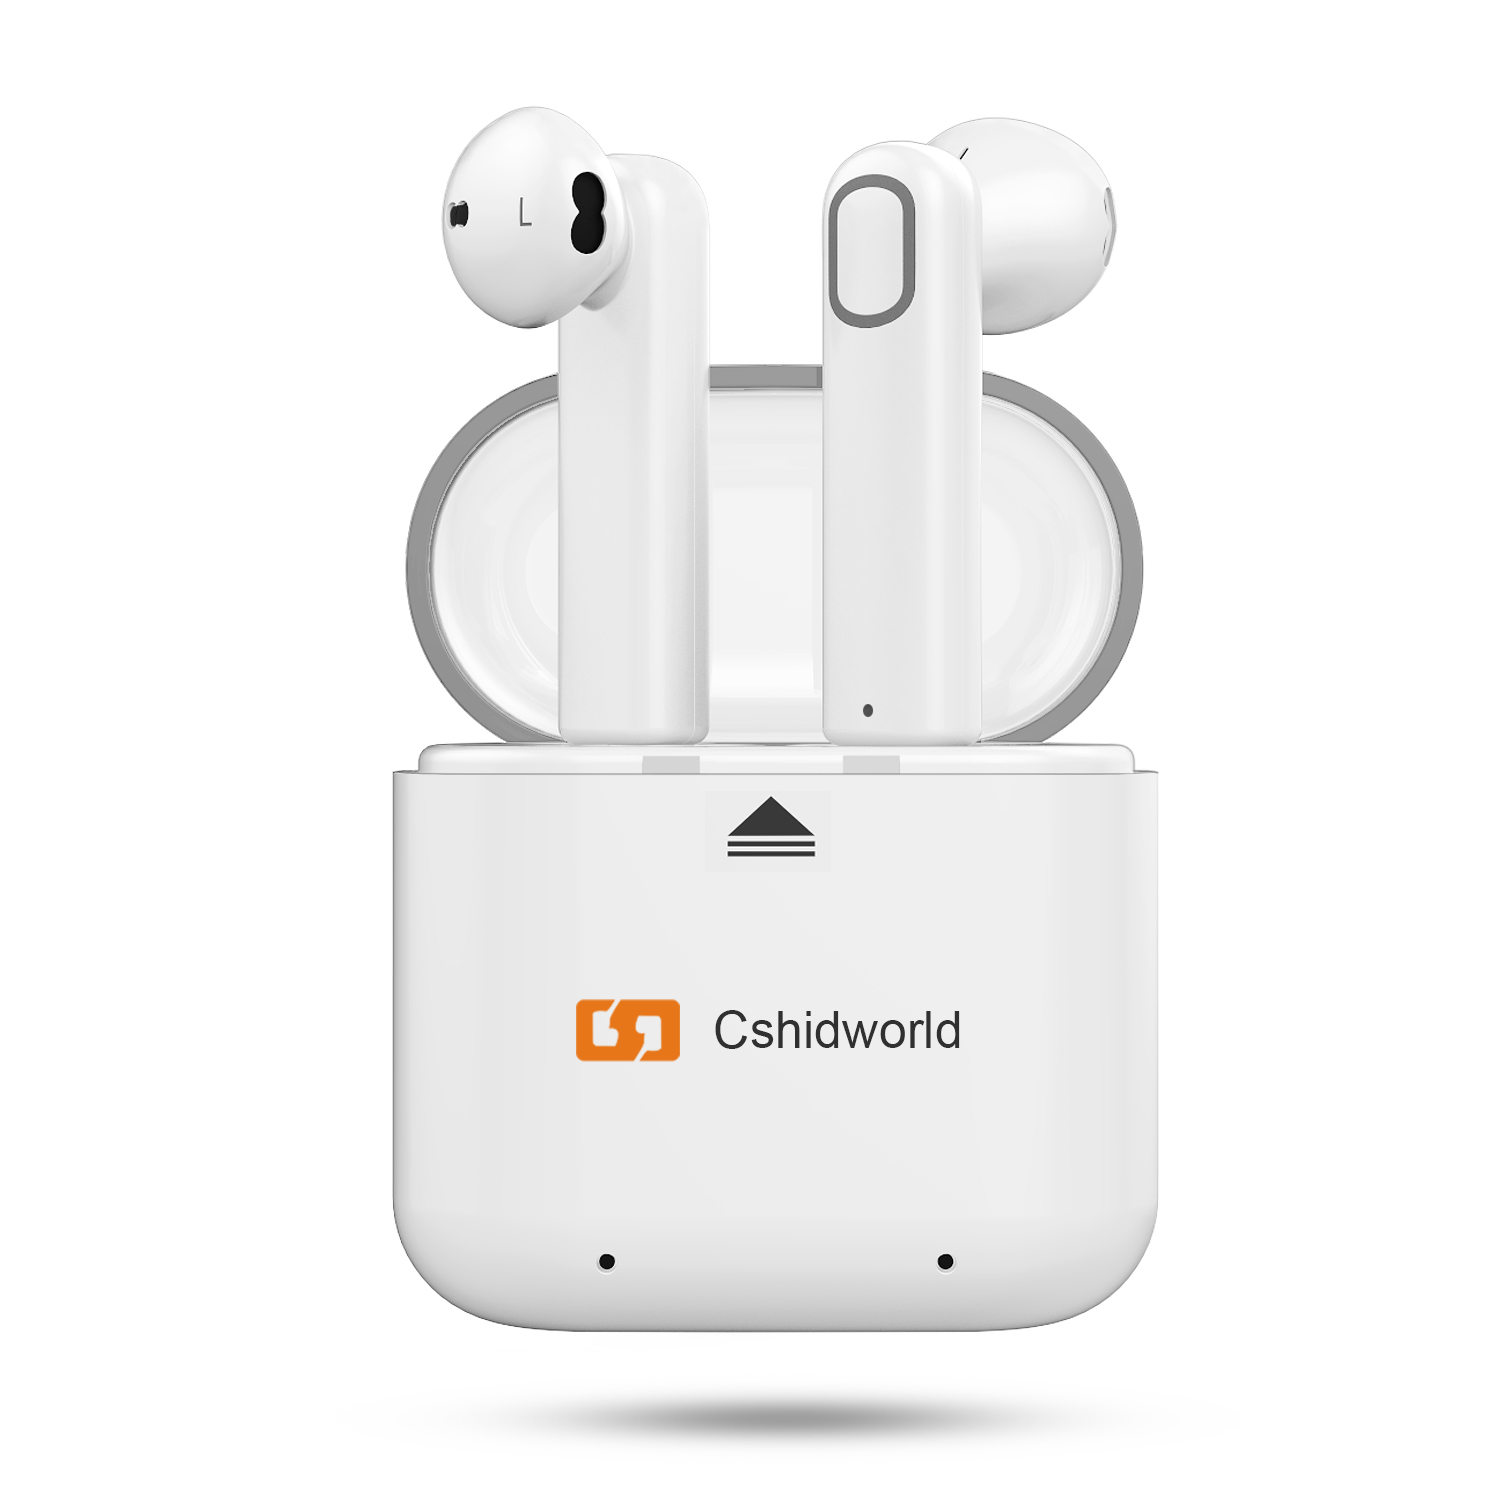 True Wireless Stereo Earbuds, Cshidworld Bluetooth V4.2 Sports Headphones Mini In-Ear Headsets Earphone Earpiece Sweatproof with Charging Box Noise Cancelling for Android and iOS Smartphones - White